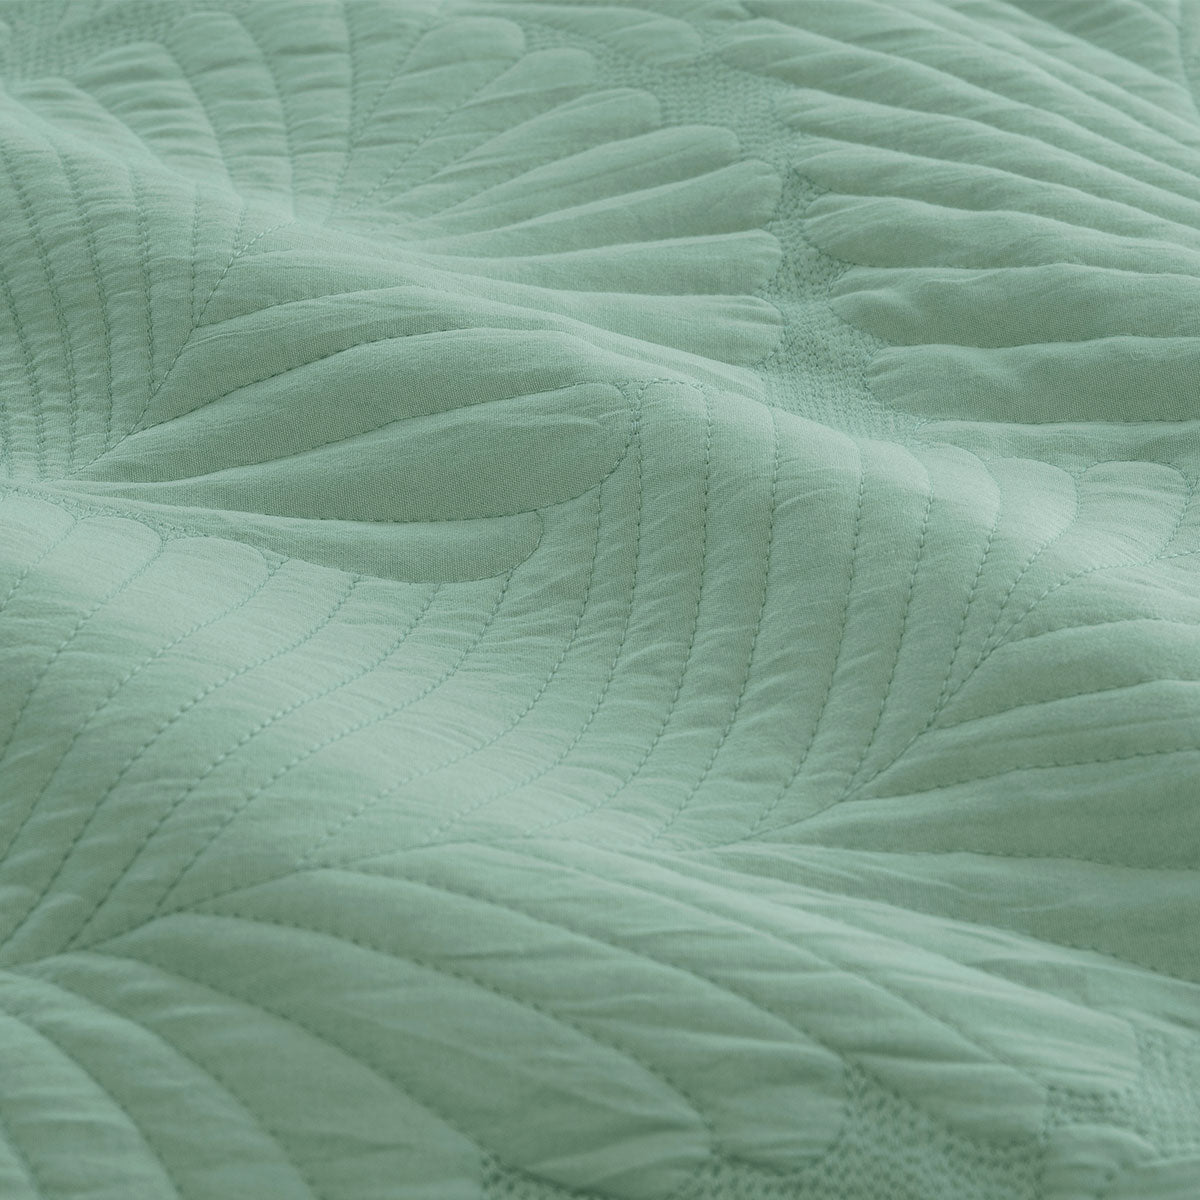 Ardor Molly Palm Green Quilted Queen Quilt Cover Set